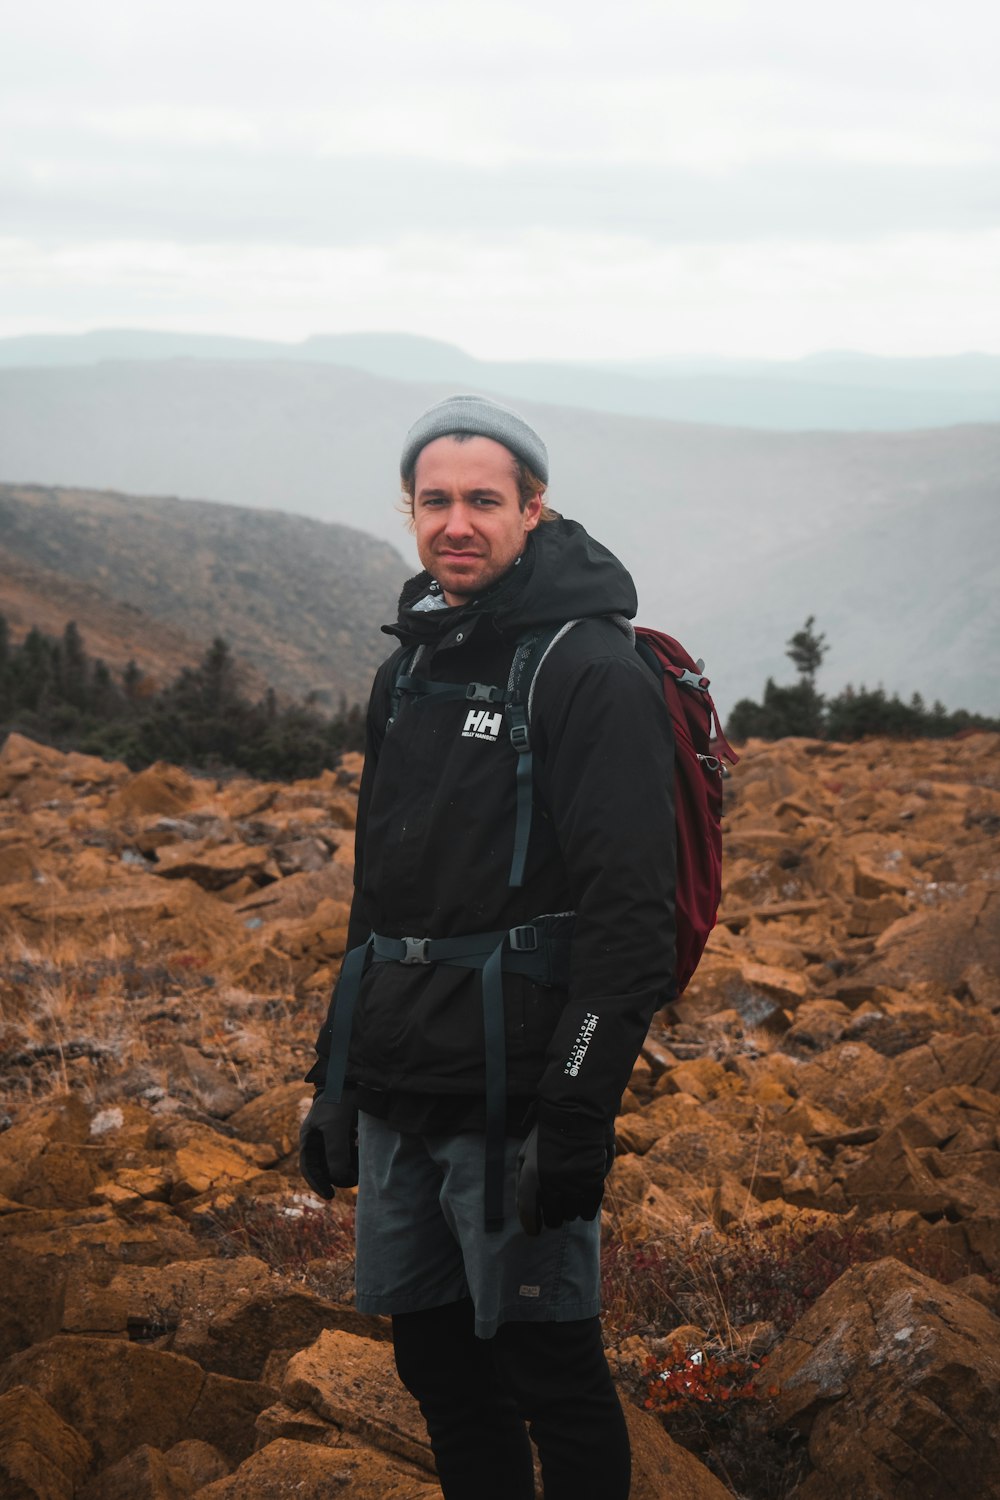 man in black jacket and black pants with black backpack standing on brown rocky mountain during